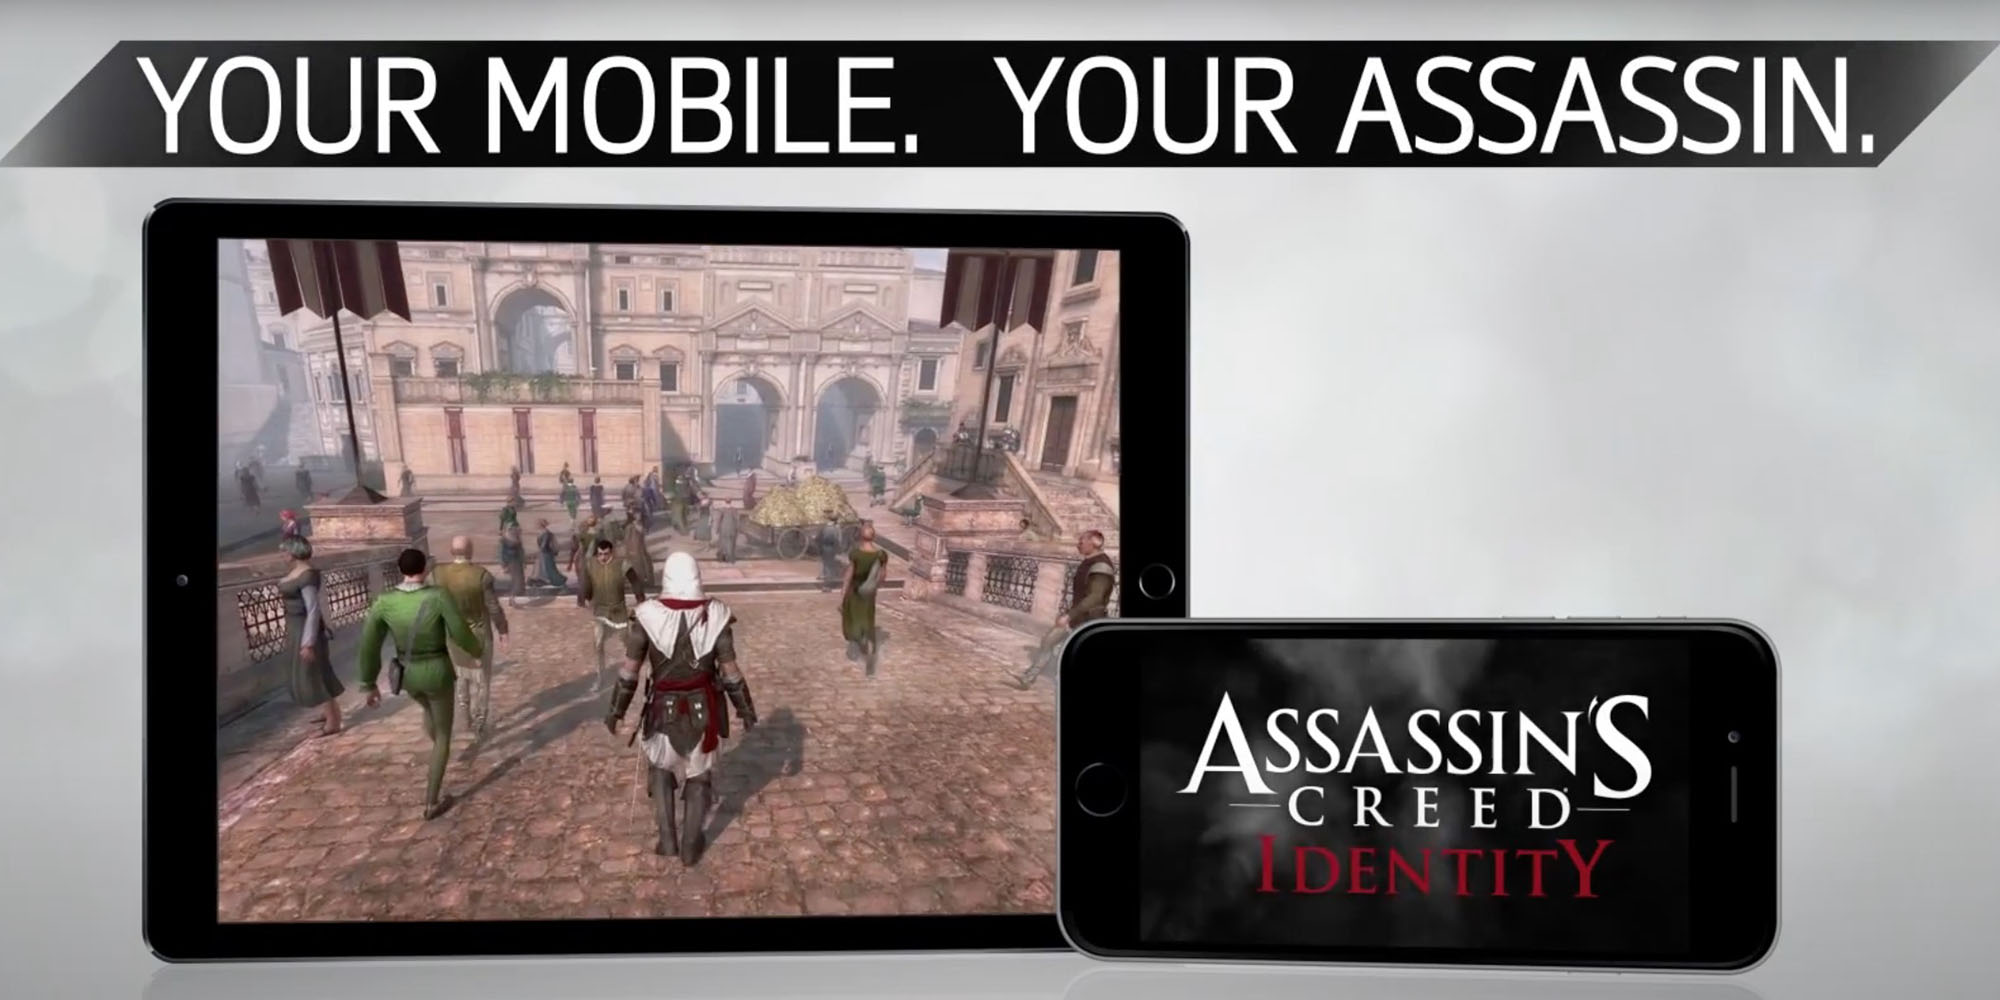 Assassin's Creed: Identity launches in NZ, coming soon to an iOS